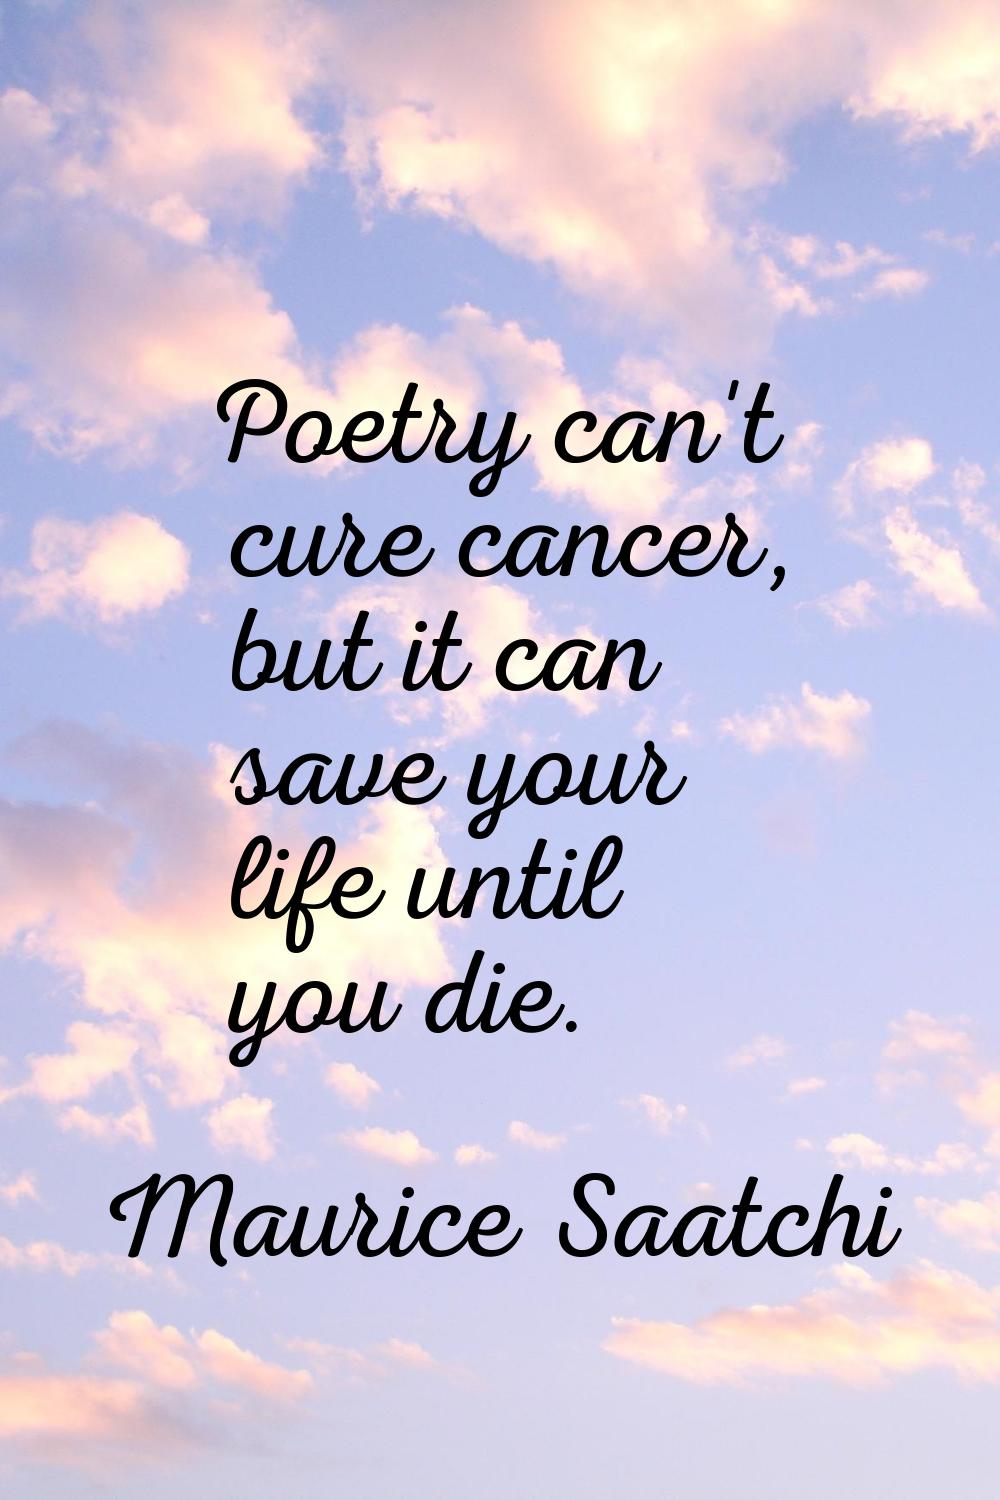 Poetry can't cure cancer, but it can save your life until you die.